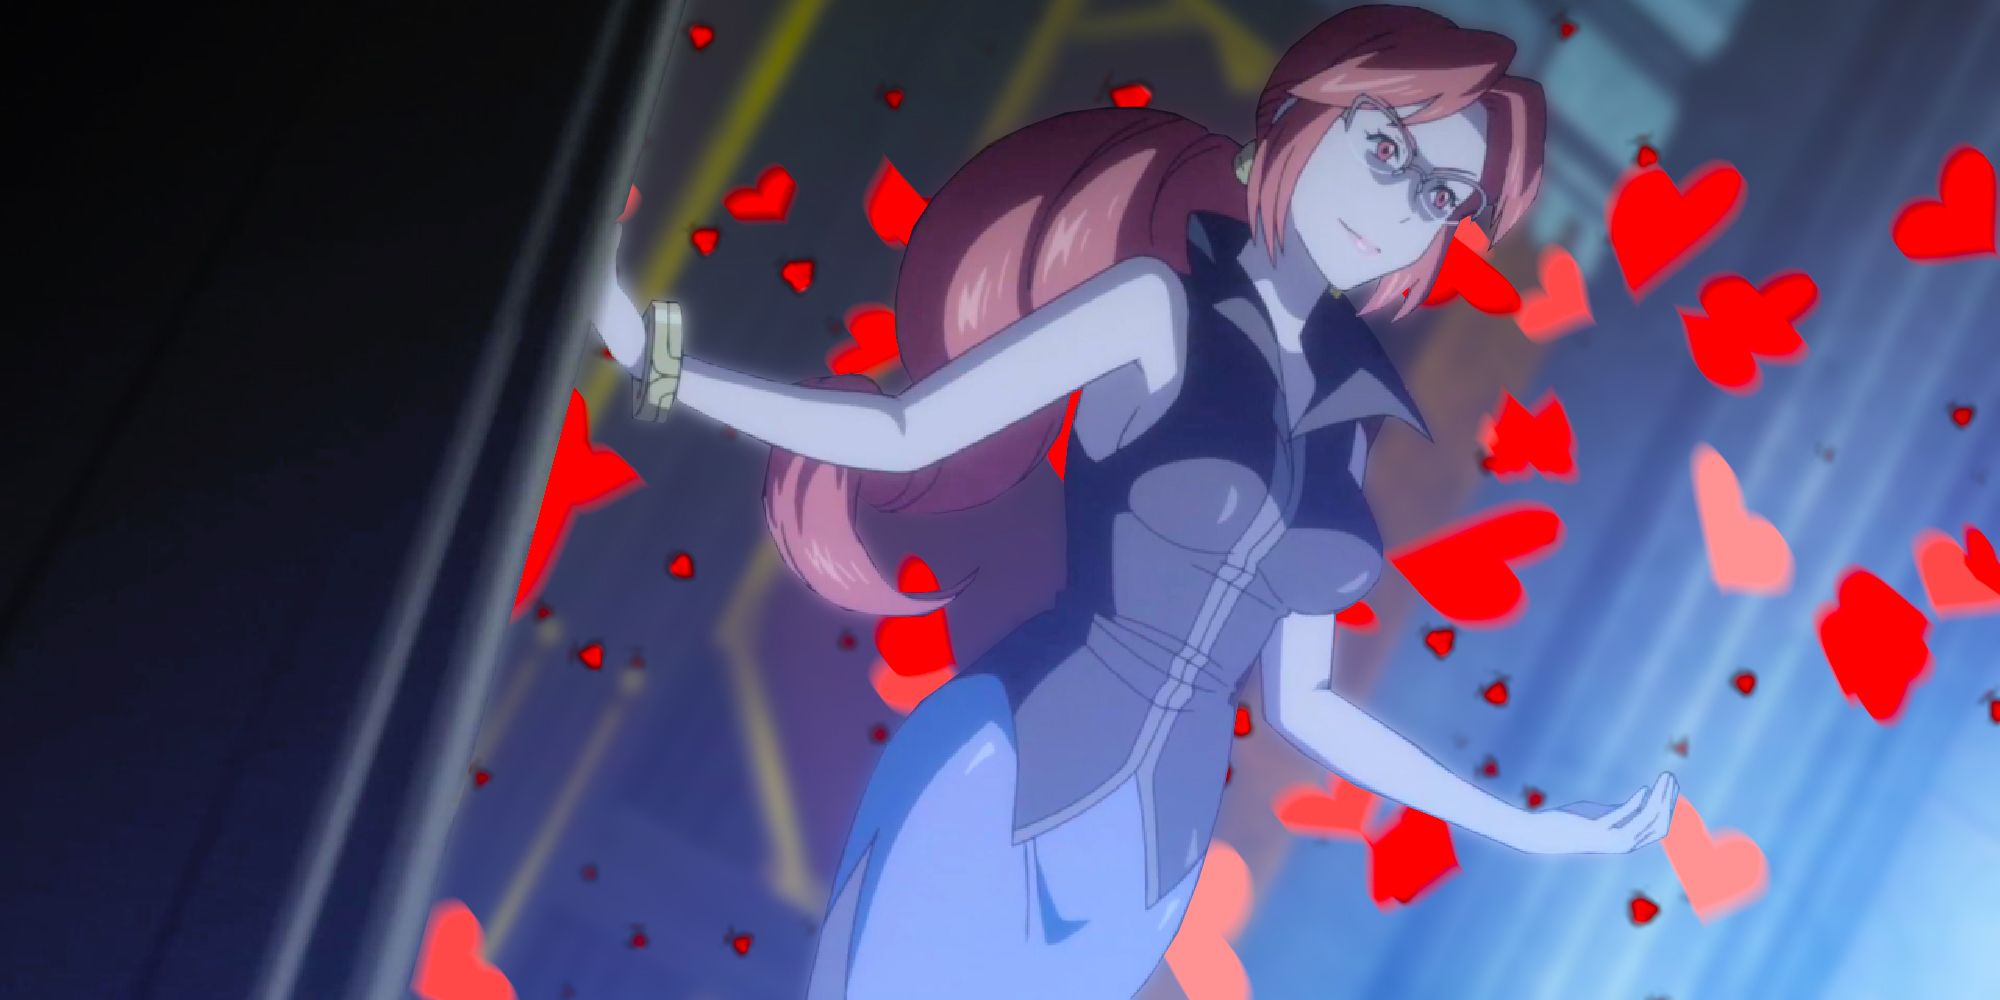 Lorelei from Pokemon surrounded by love hearts